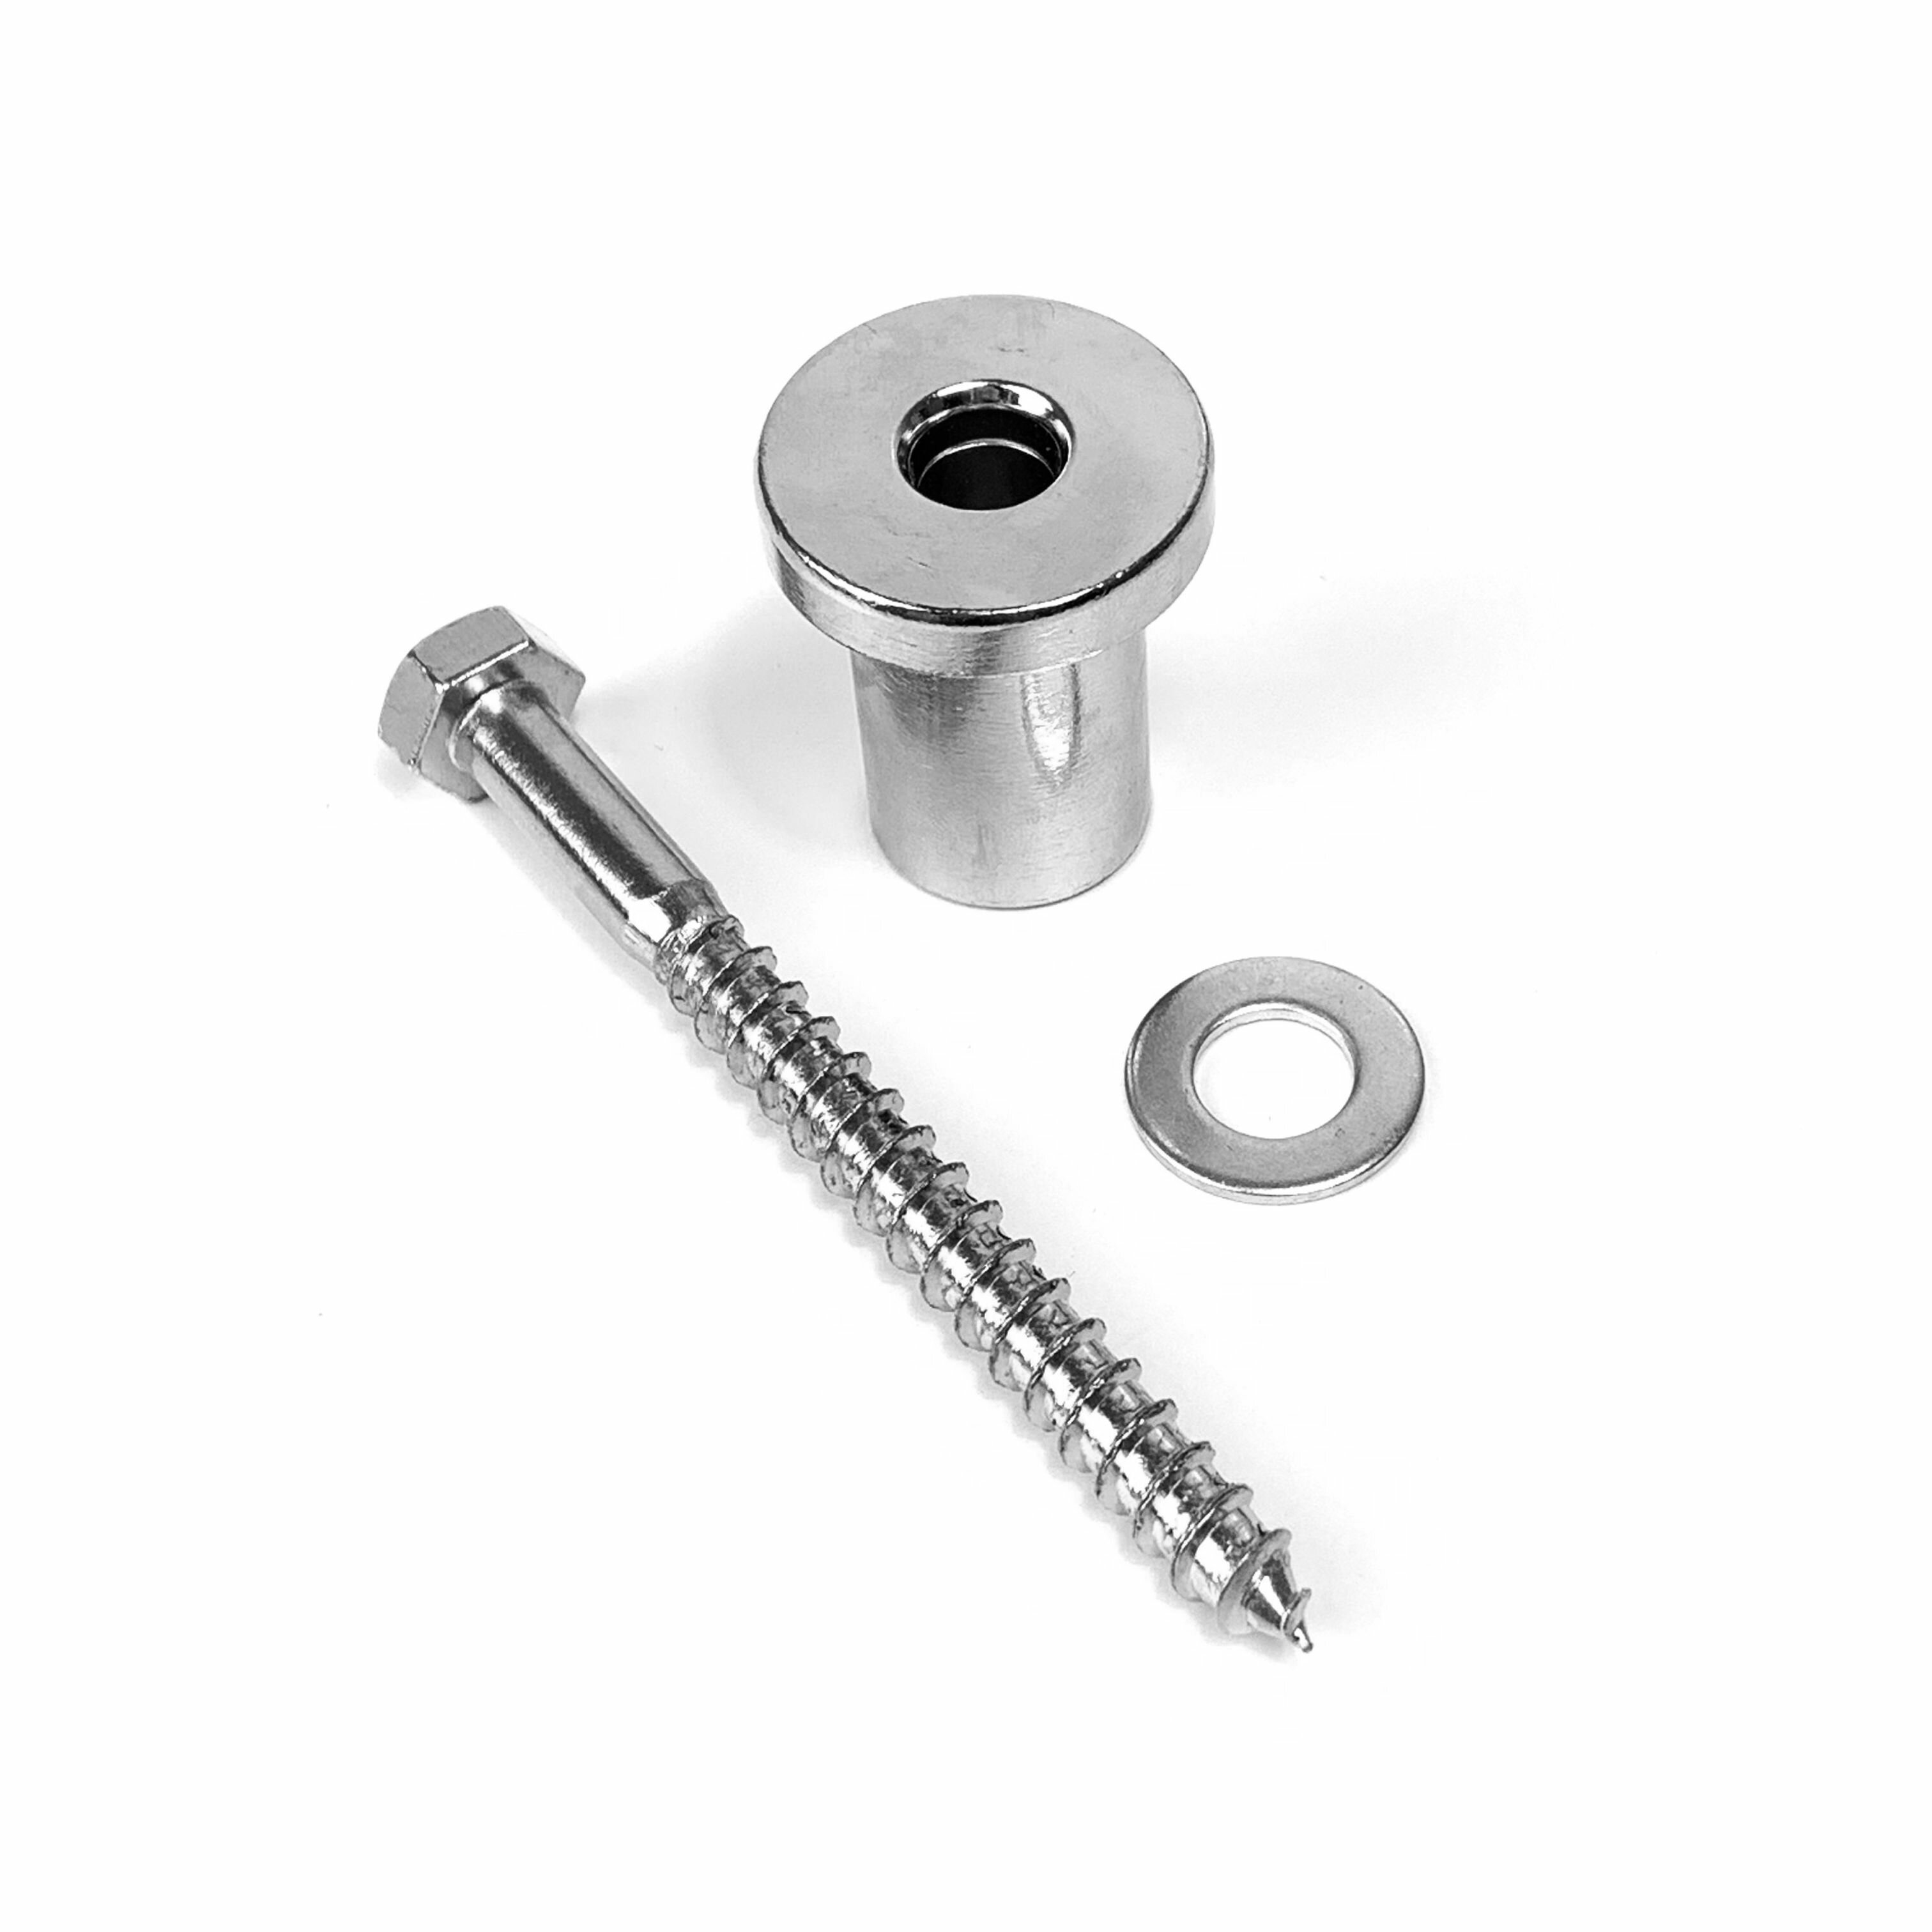 Machining 8 Inch Spring Flat Leg Divider with Brass Fittings & Speed Nut Woodworking Solid Steel & Brass Build with Self Leveling Washer Fulcrum Hardened Steel Points for Architecture 